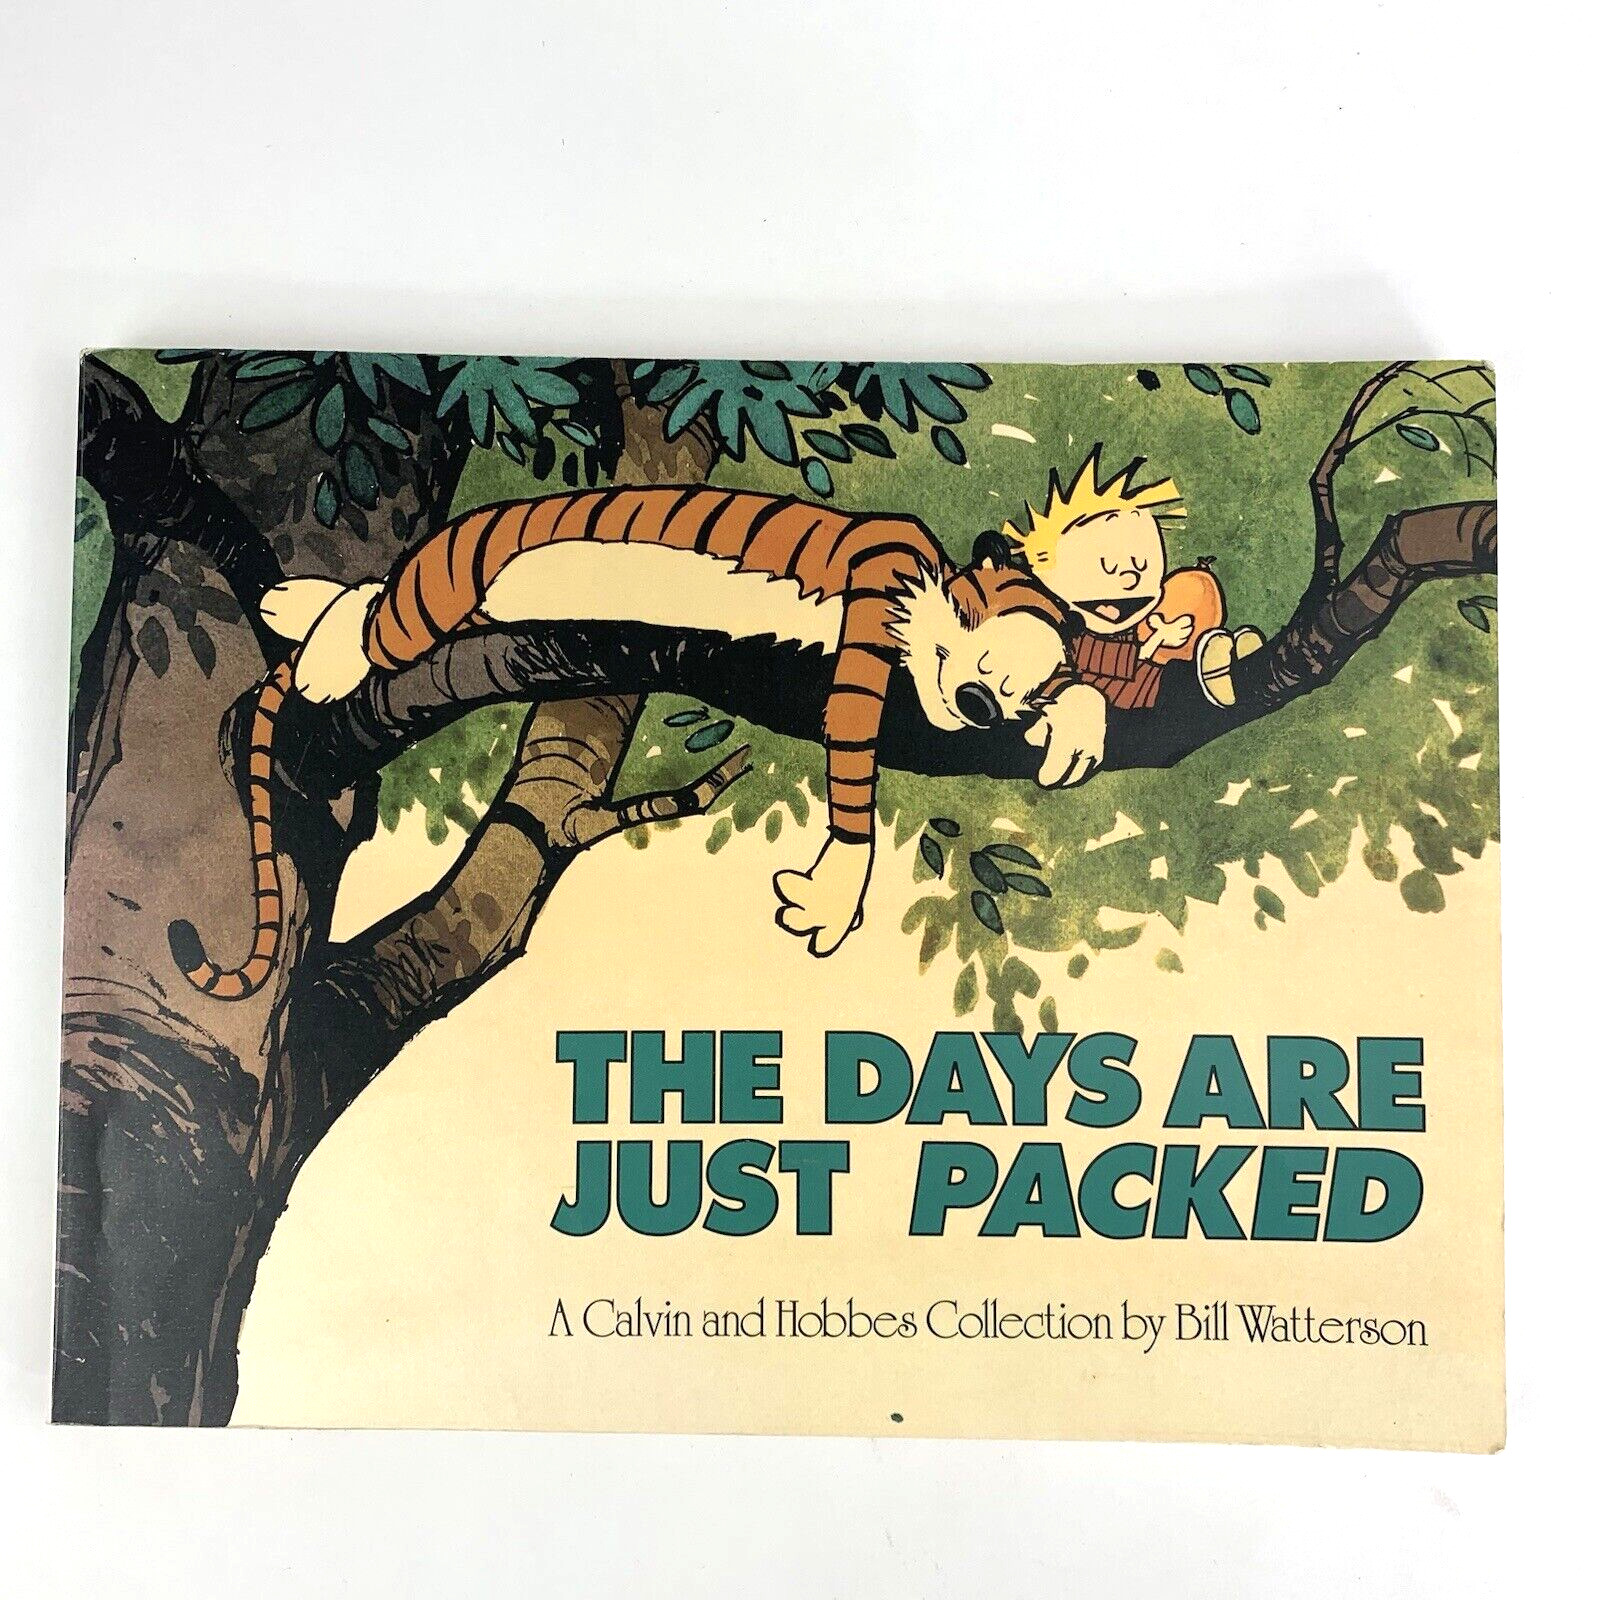 CALVIN & HOBBES The Days Are Just Packed by Bill Waterson Paper Back Book 1993